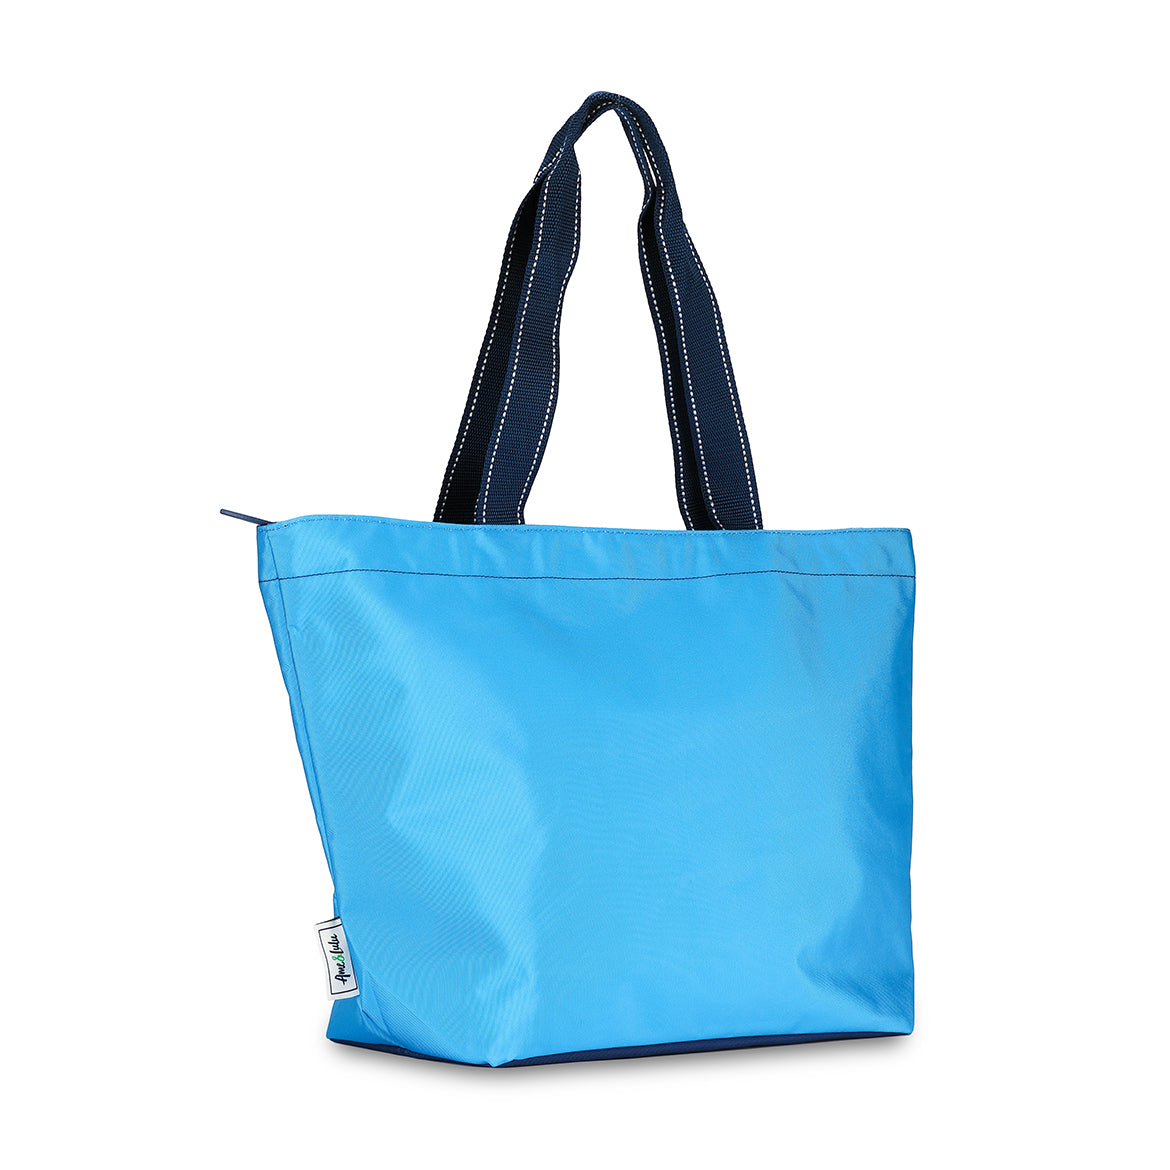 side view of blue nylon tote bag